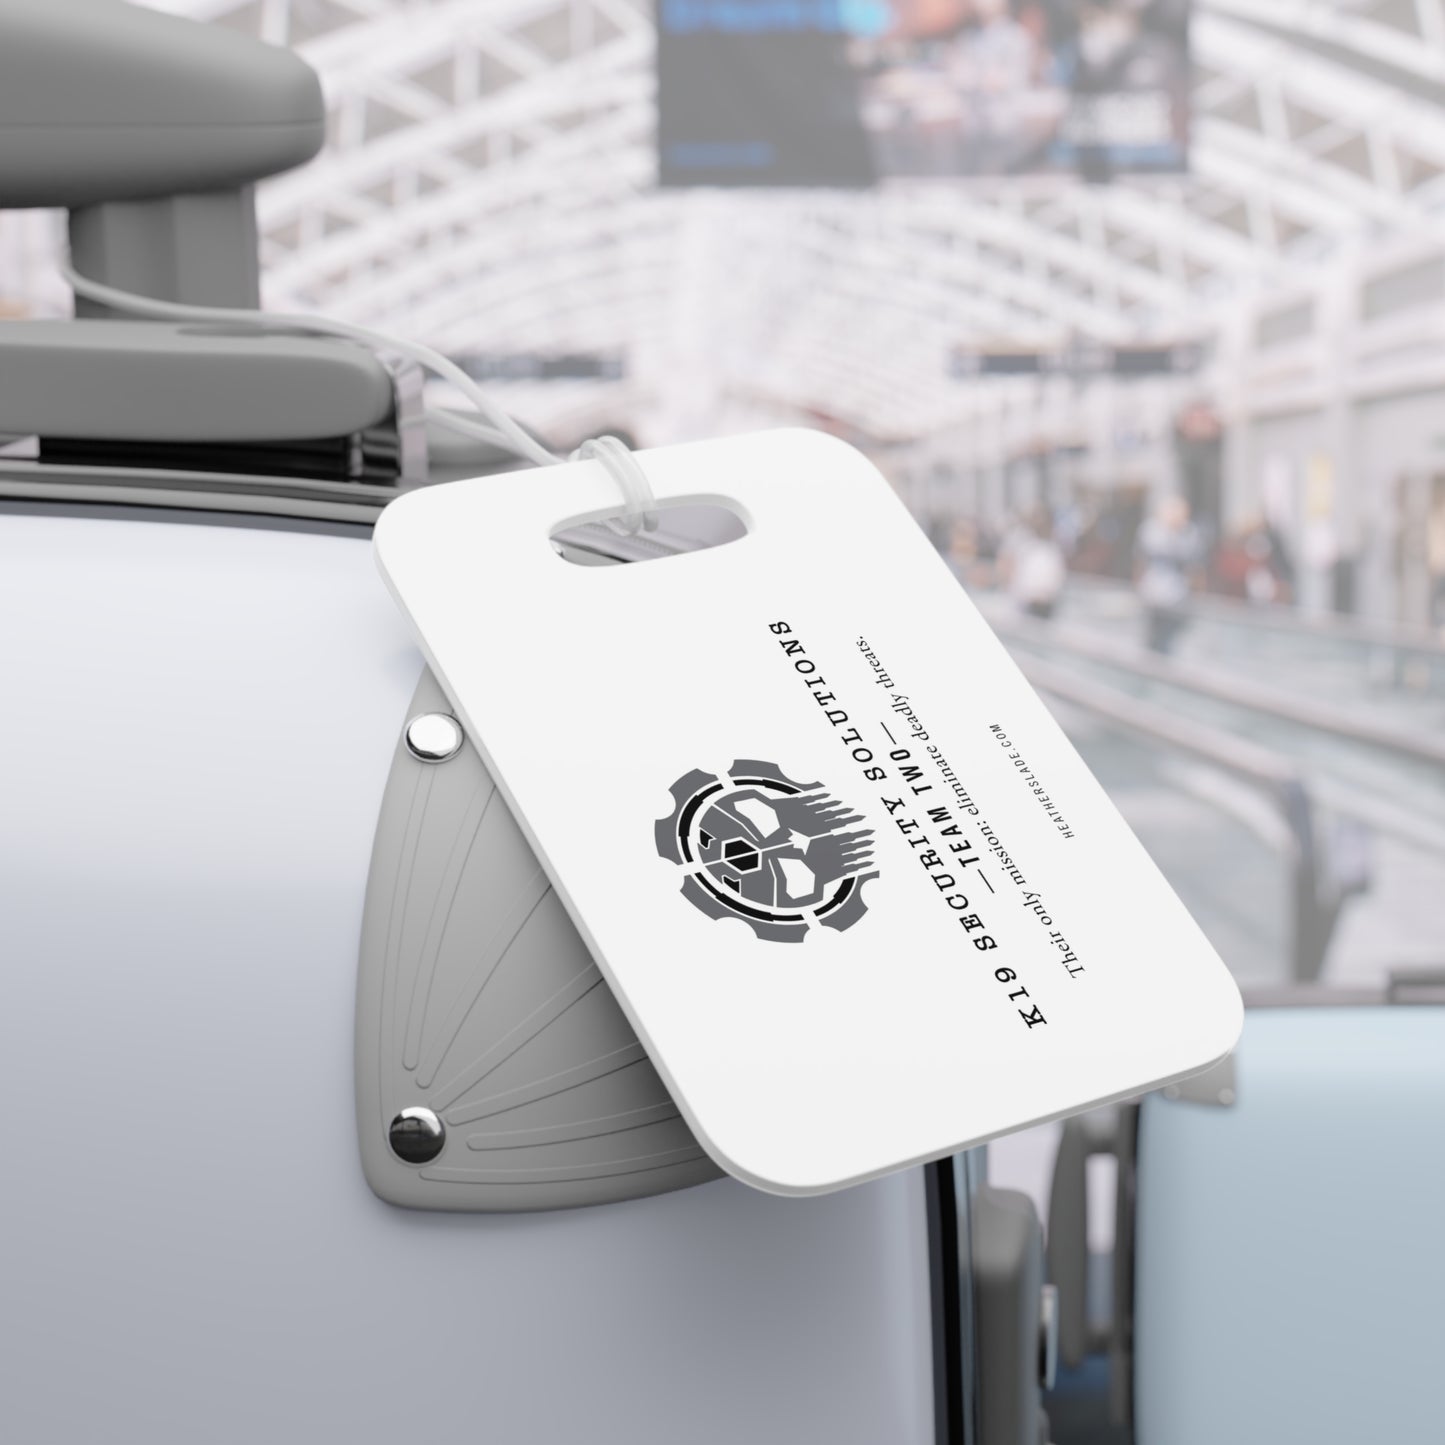 K19 Security Solutions Team Two Luggage Tags